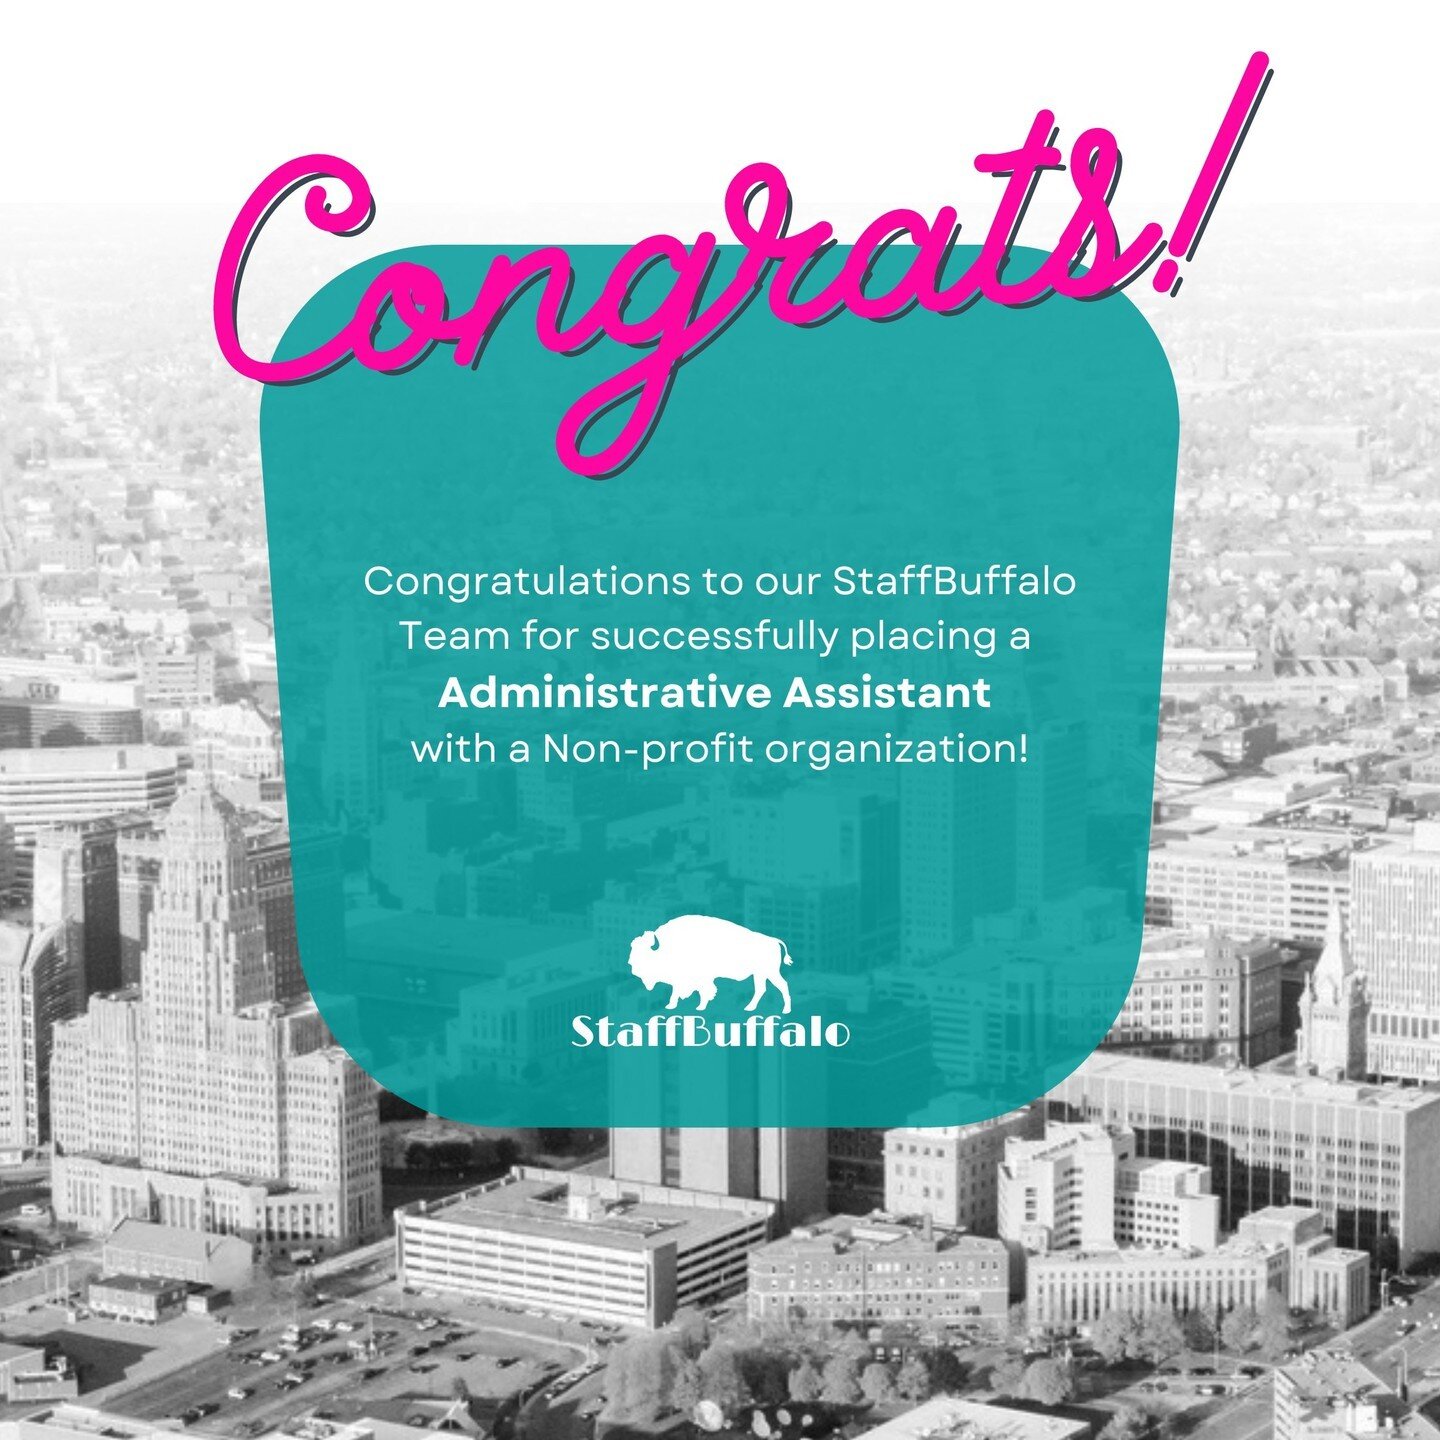 Great news! StaffBuffalo has successfully filled the Administrative Assistant position at a wonderful nonprofit organization. We are thrilled to have connected a highly skilled and professional candidate with this organization and know that their tal